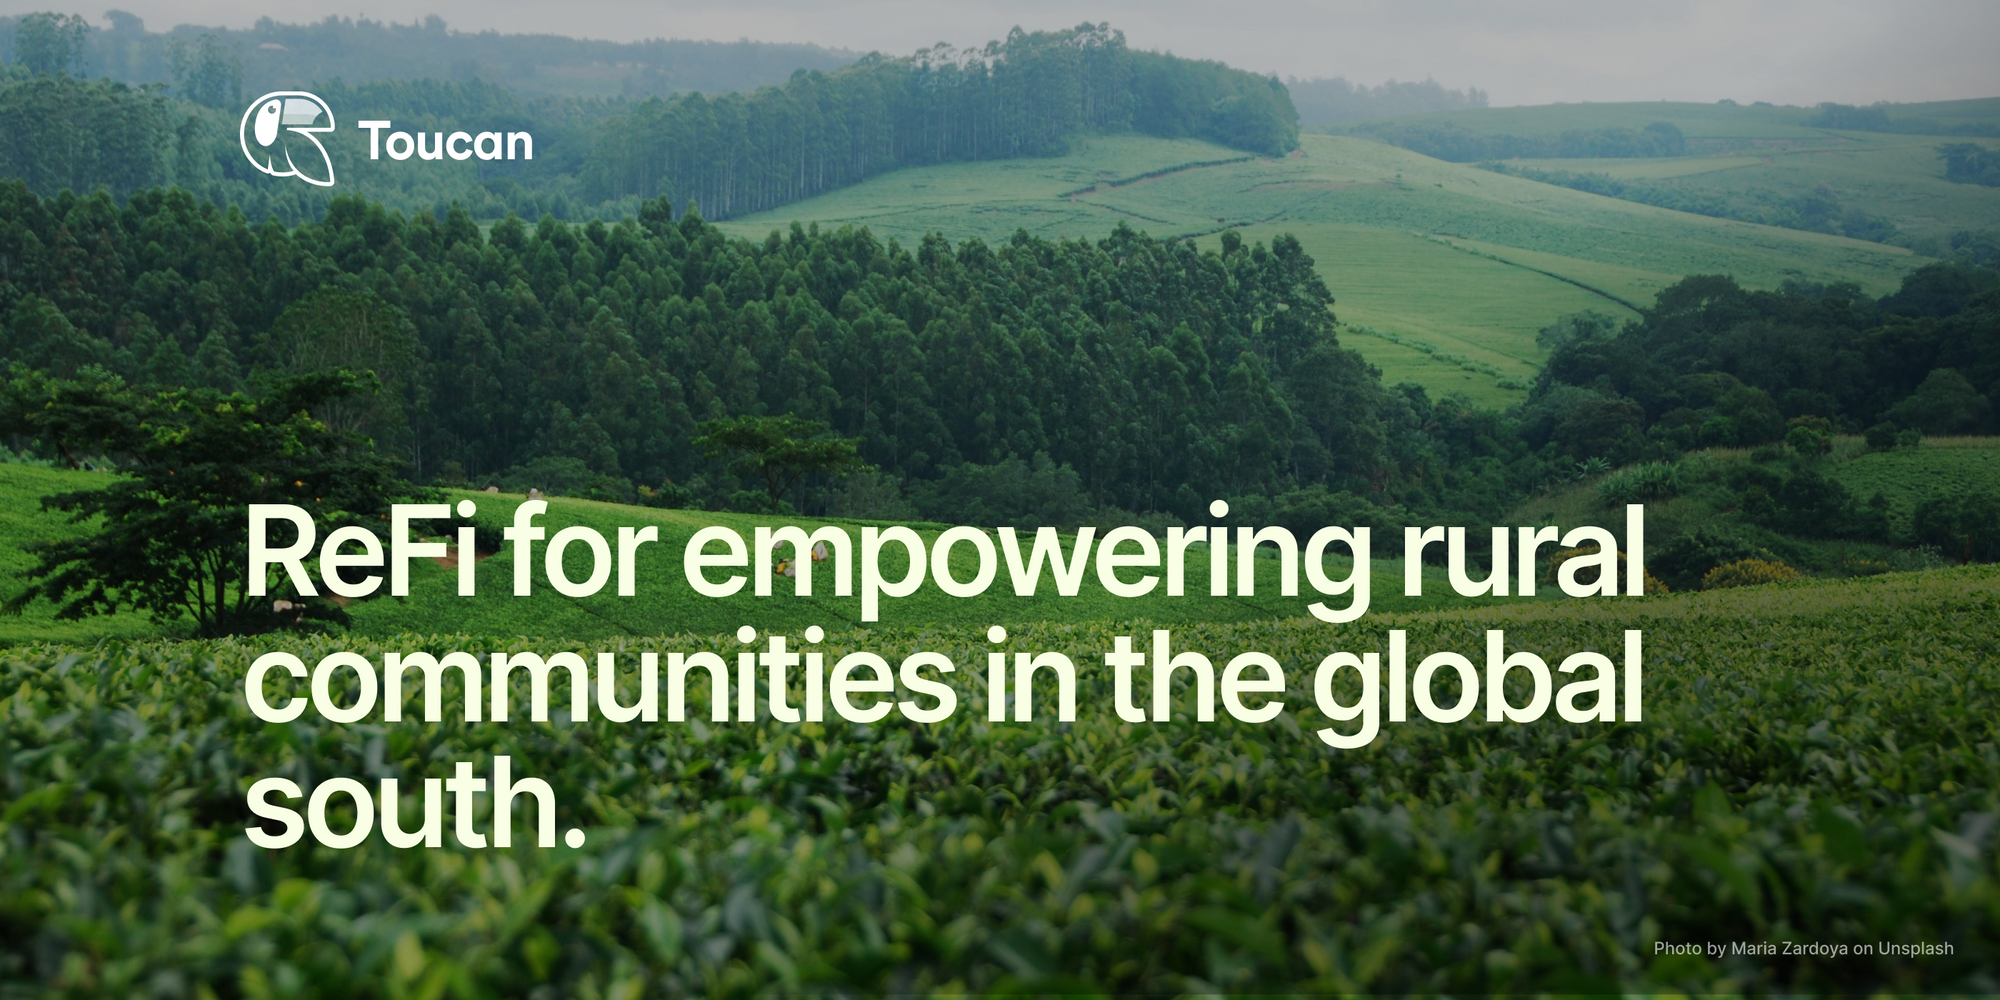 ReFi for empowering communities in the global south